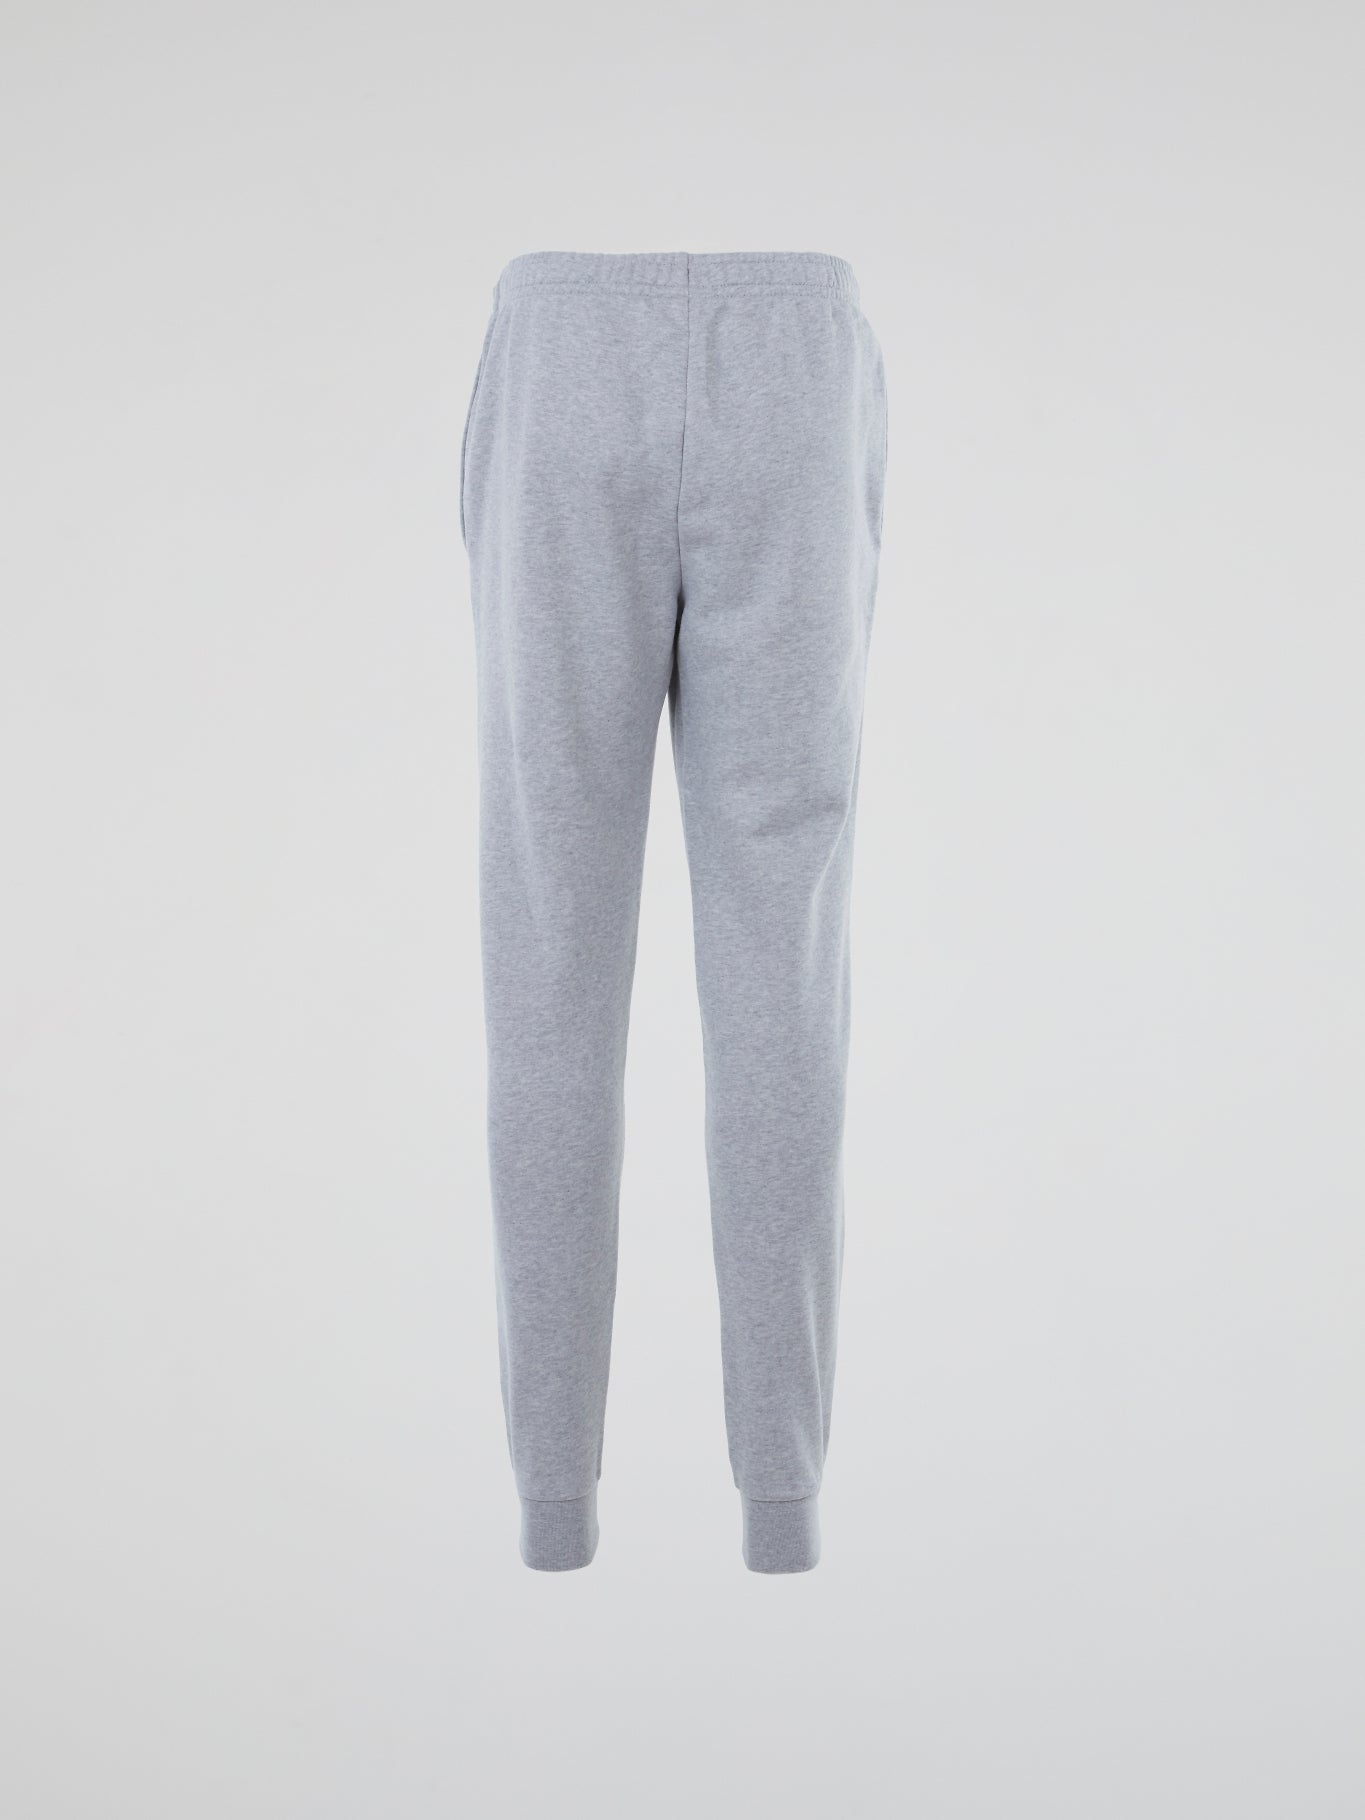 Grey Track Trousers